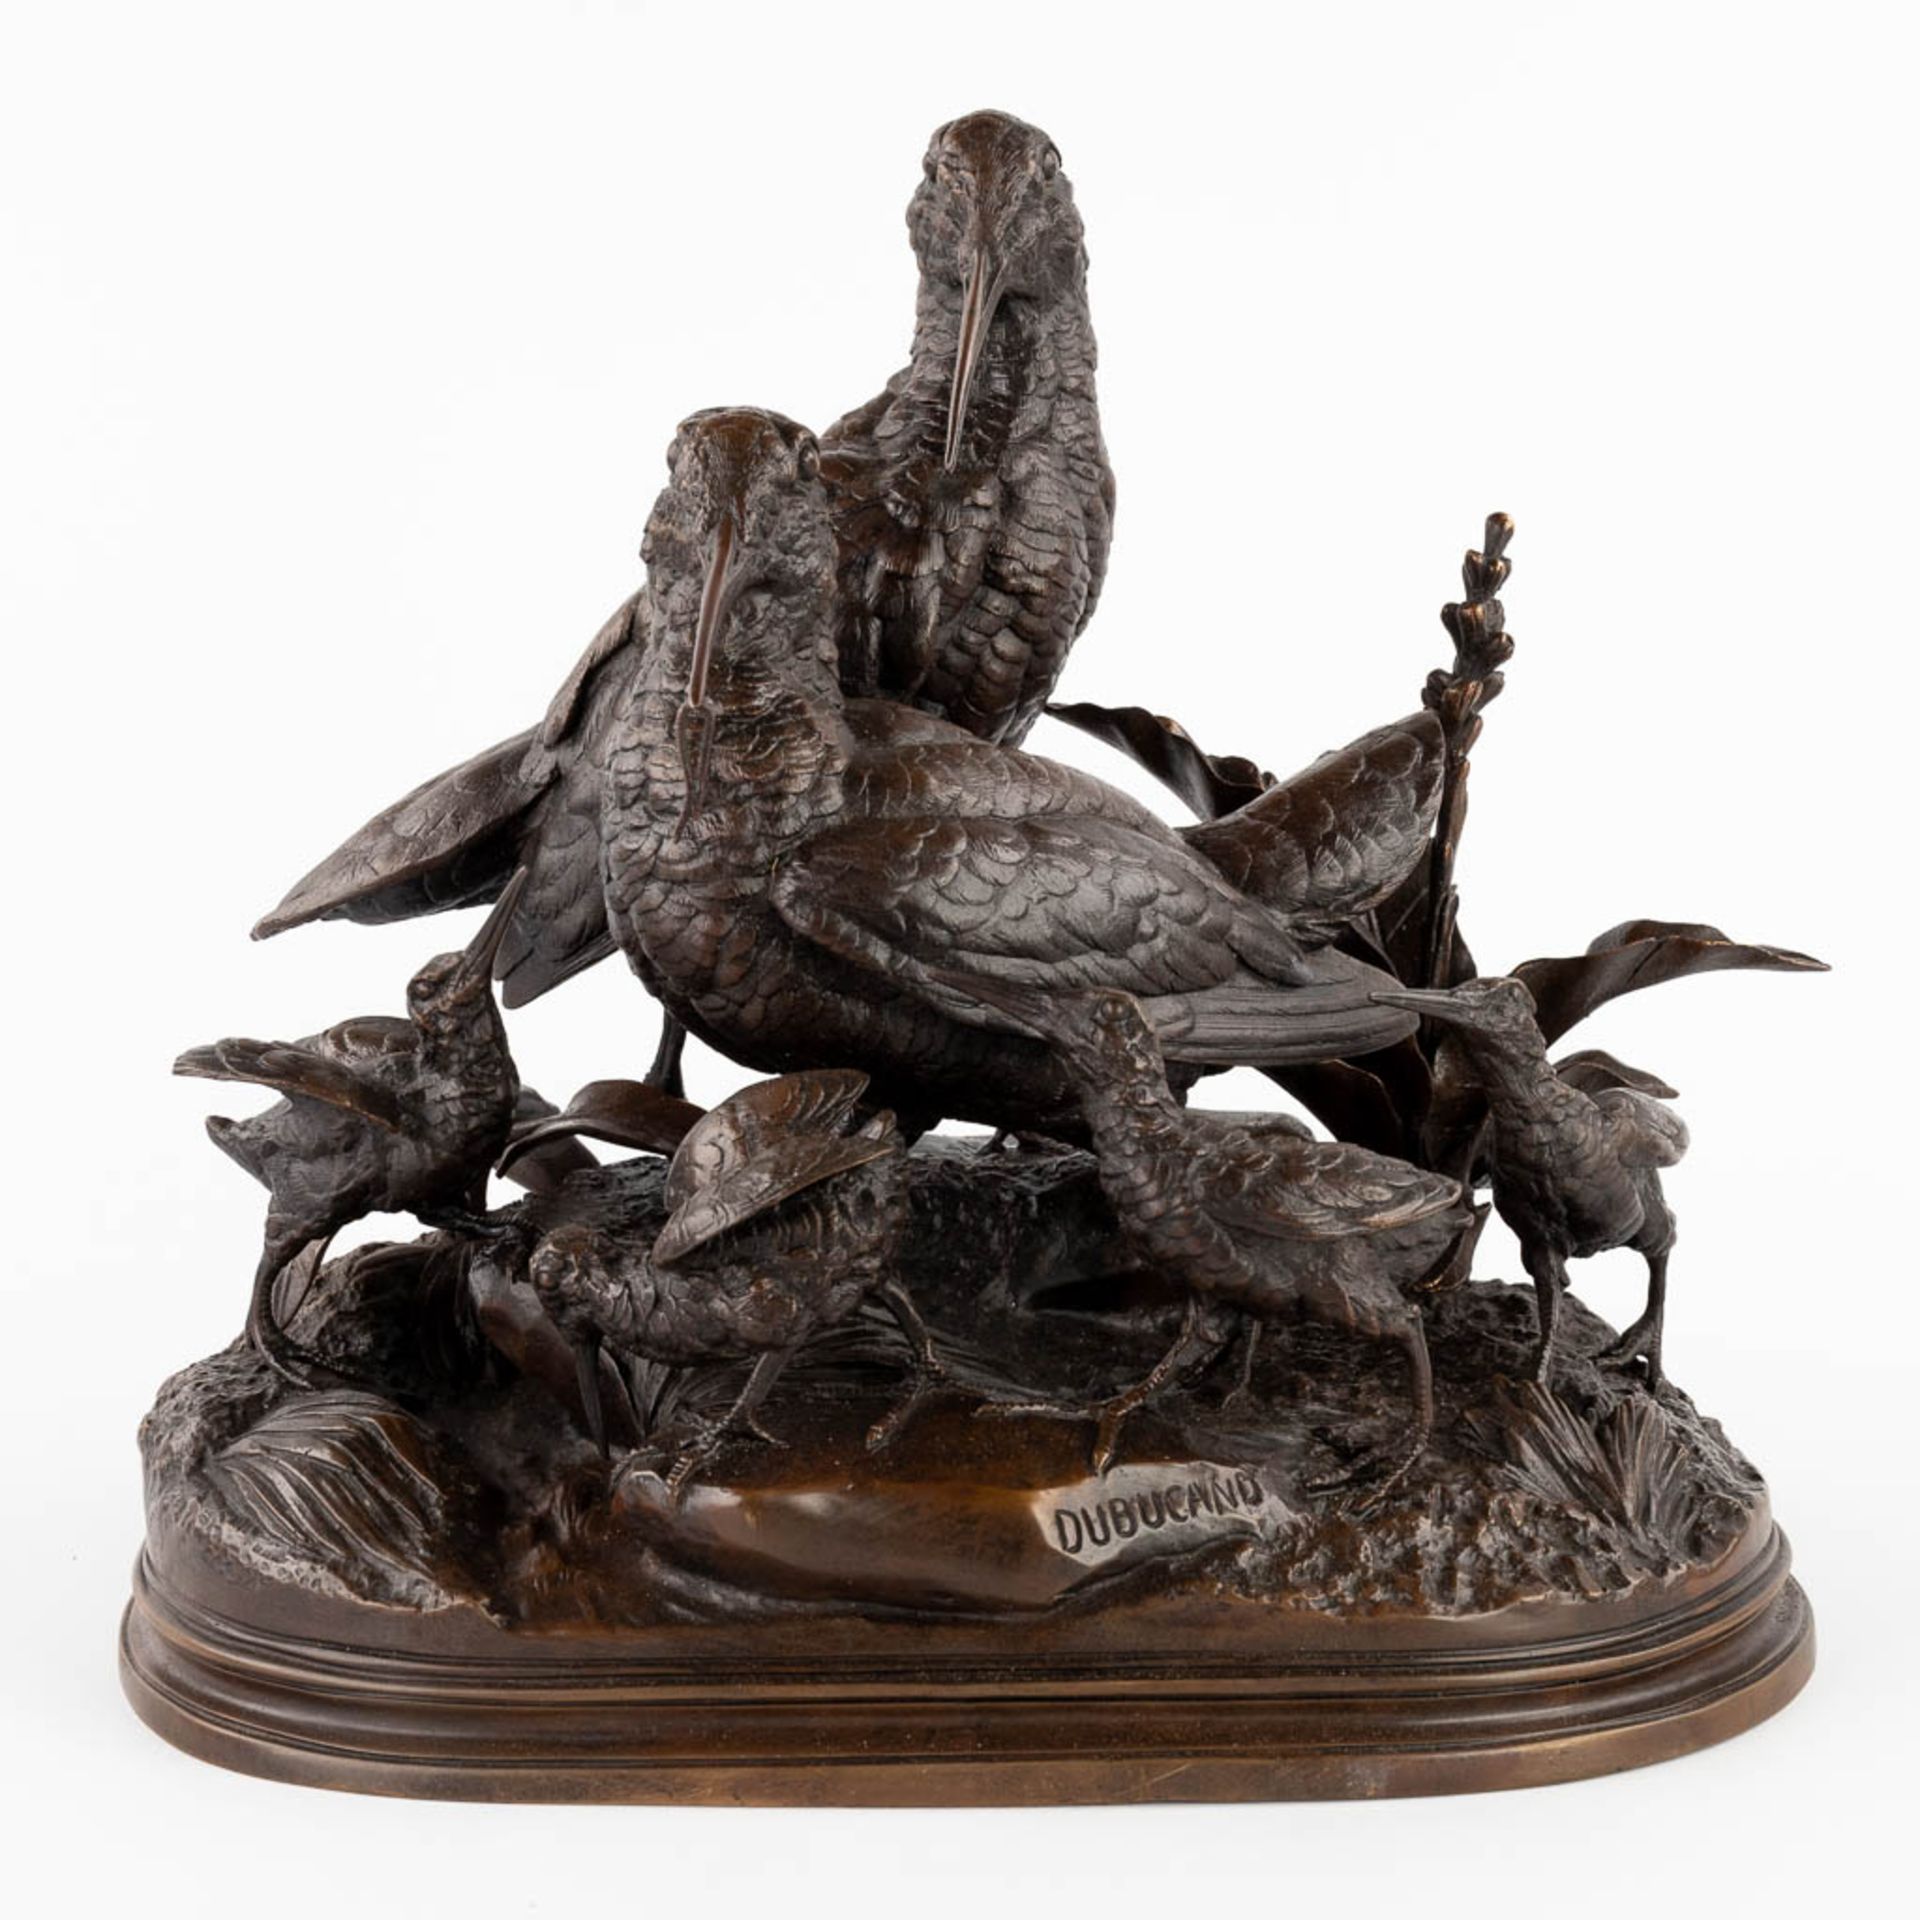 Alfred DUBUCAND (1828-1894) 'Woodcock with youngsters' patinated bronze. (L:26 x W:40 x H:36 cm)